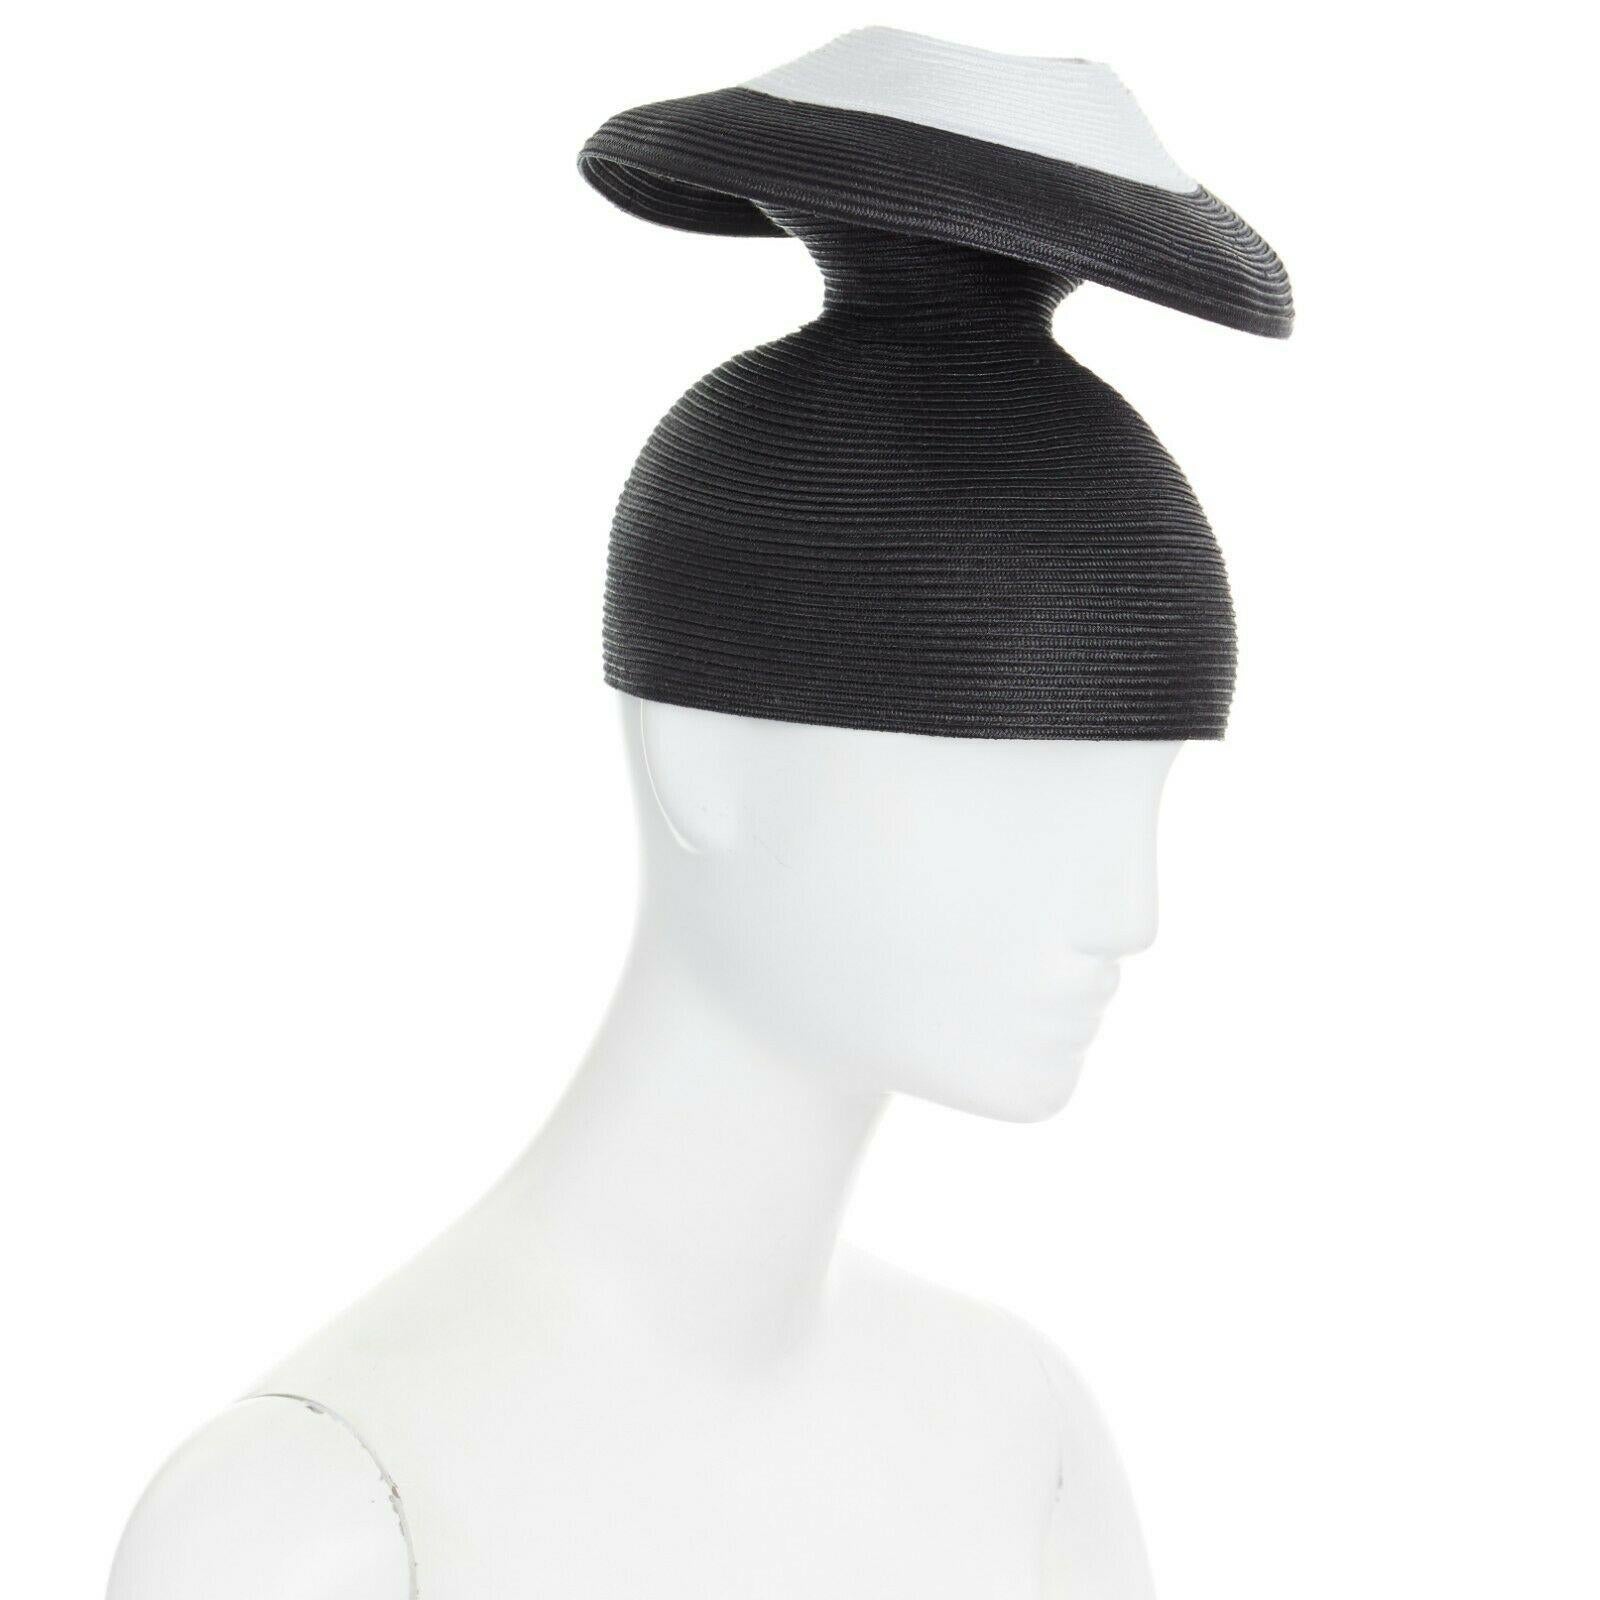 ISSEY MIYAKE PLEATS PLEASE
Black raffia straw knit. White circle at top. Architectural dual layered design. Statement party hat. Grosgrain trimmed along lining. Made in Japan.

CONDITION
New without tags.